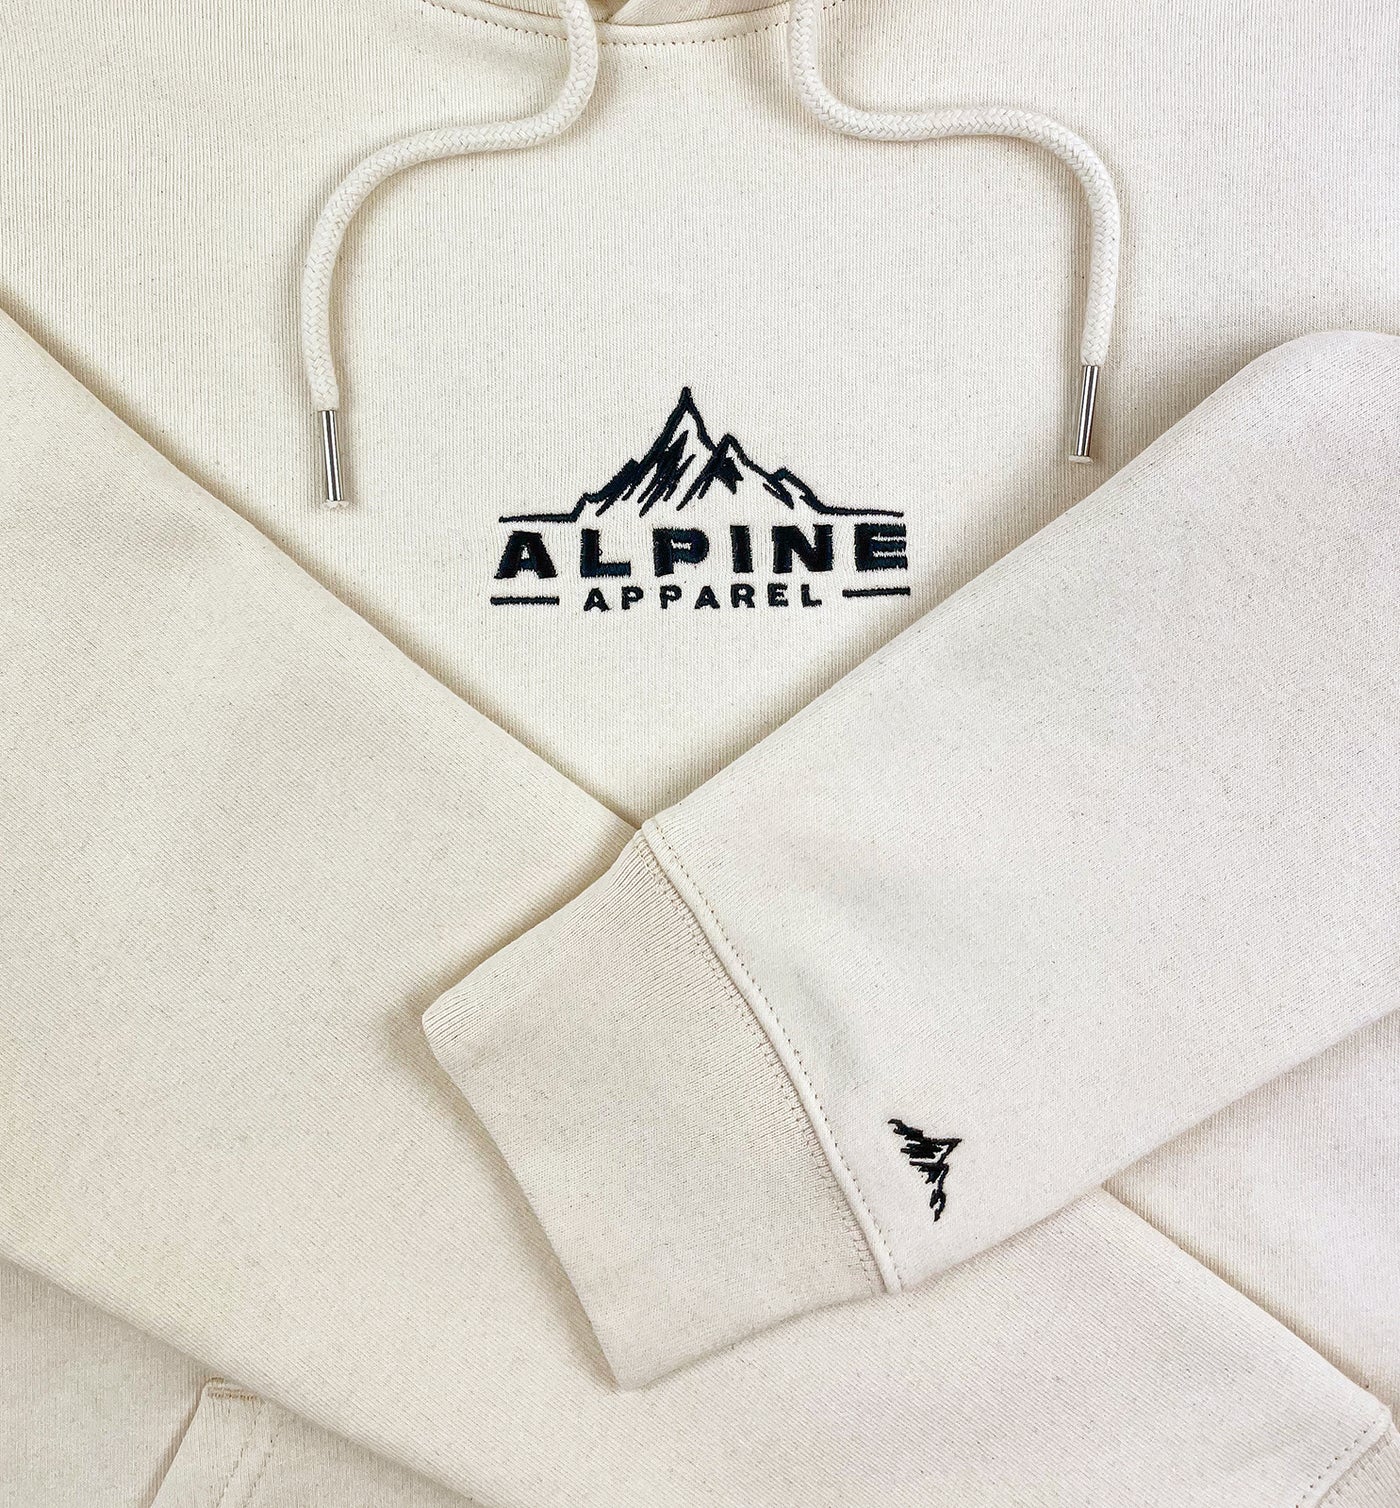 Alpine Natural Classic Hoodie product front closeup photo